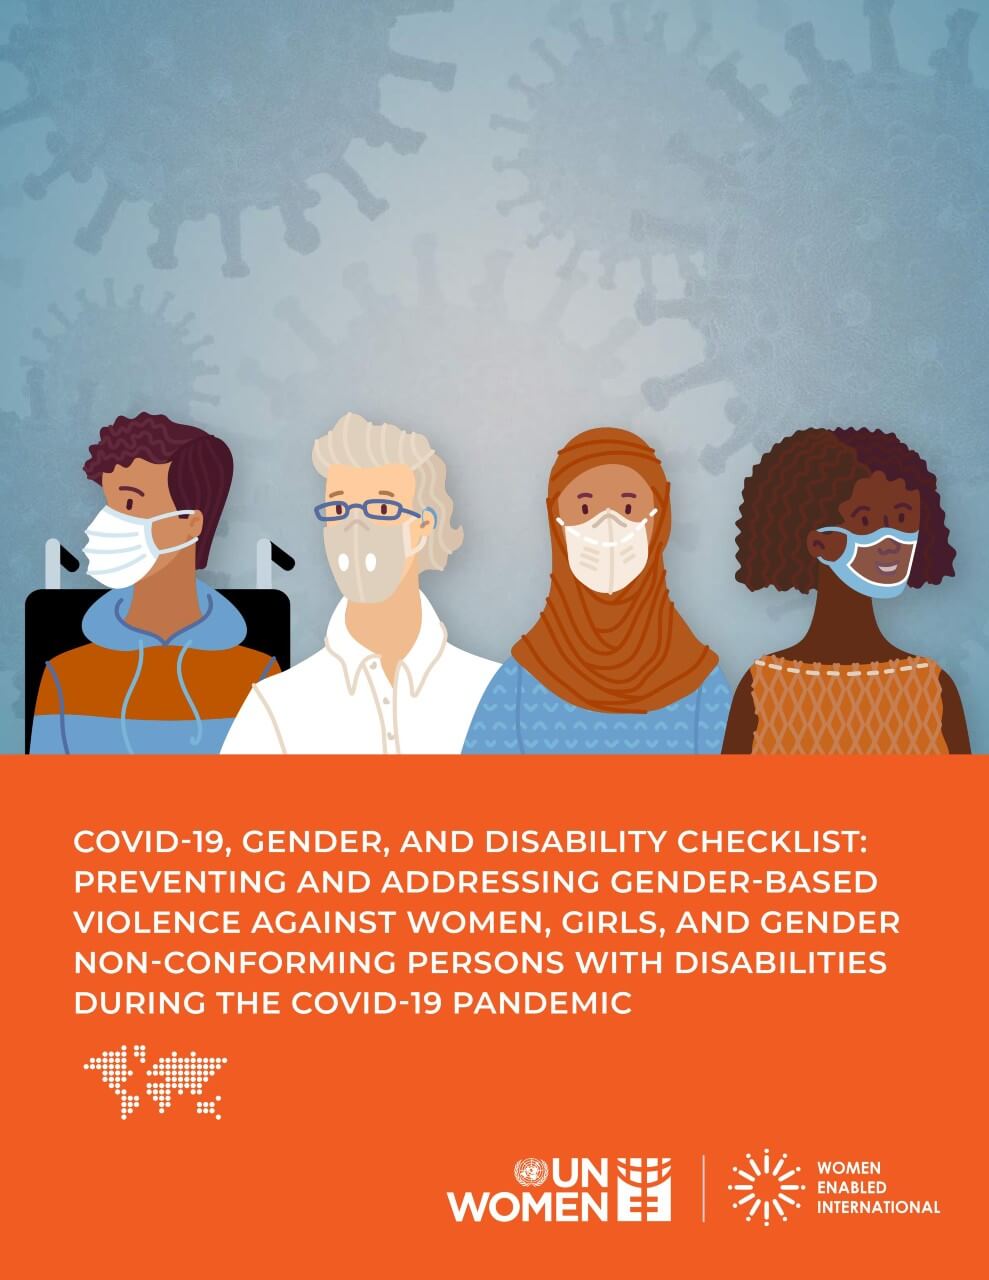 COVID-19, gender, and disability checklist: Preventing and addressing gender-based violence against women, girls, and gender non-conforming persons with disabilities during the COVID-19 pandemic